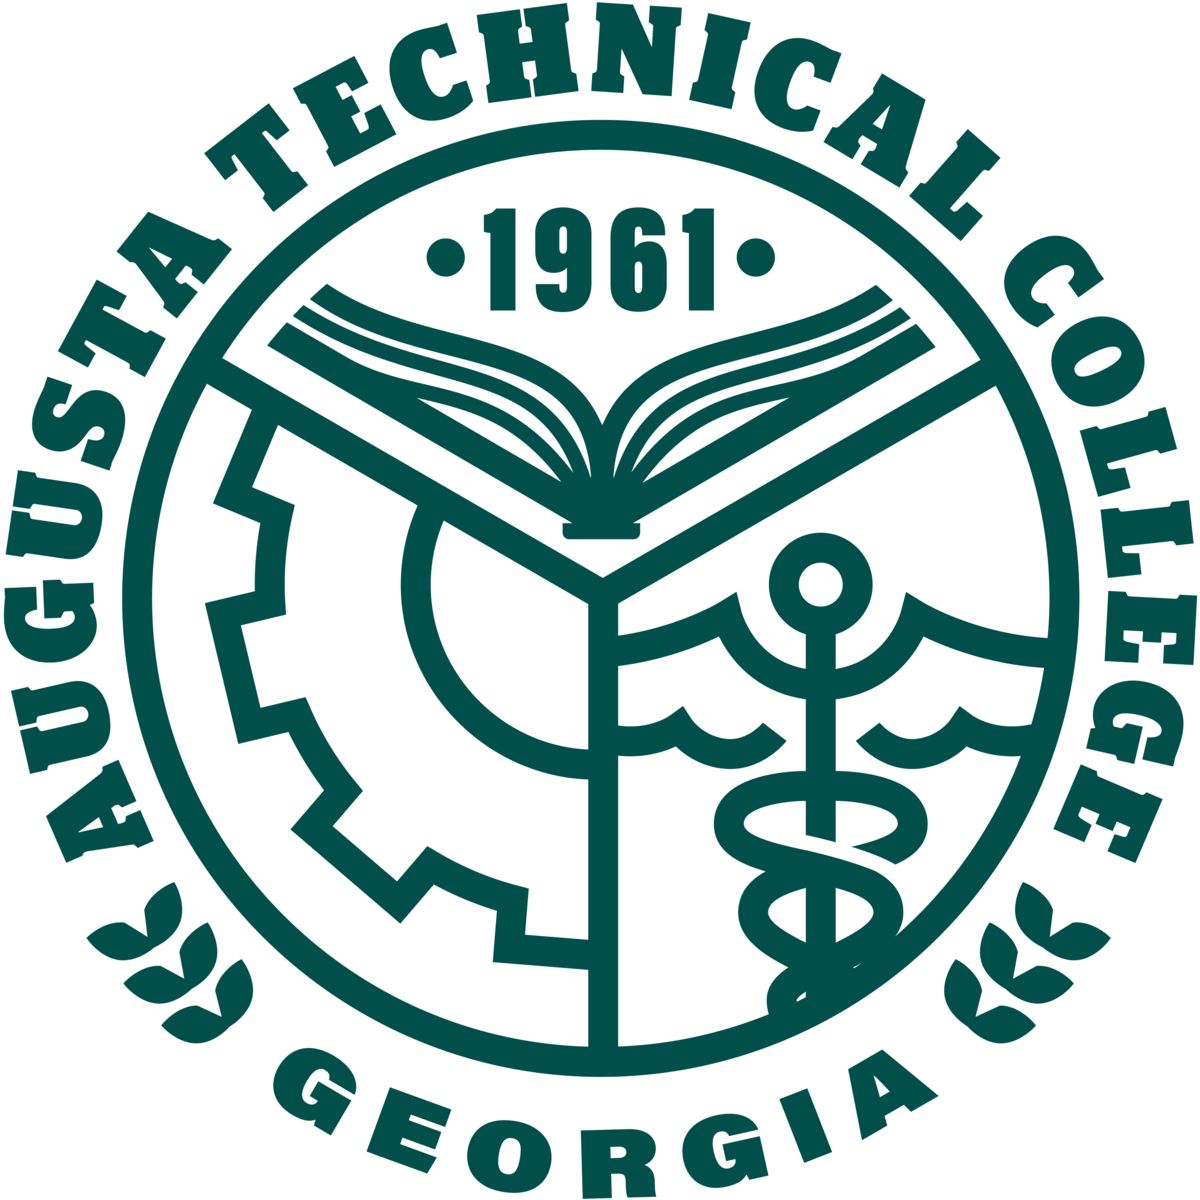 An uppercase abstract A in Heritage Green composed of a smaller leg representing Augusta Technical College supporting the larger leg representing the Augusta Community and economy.